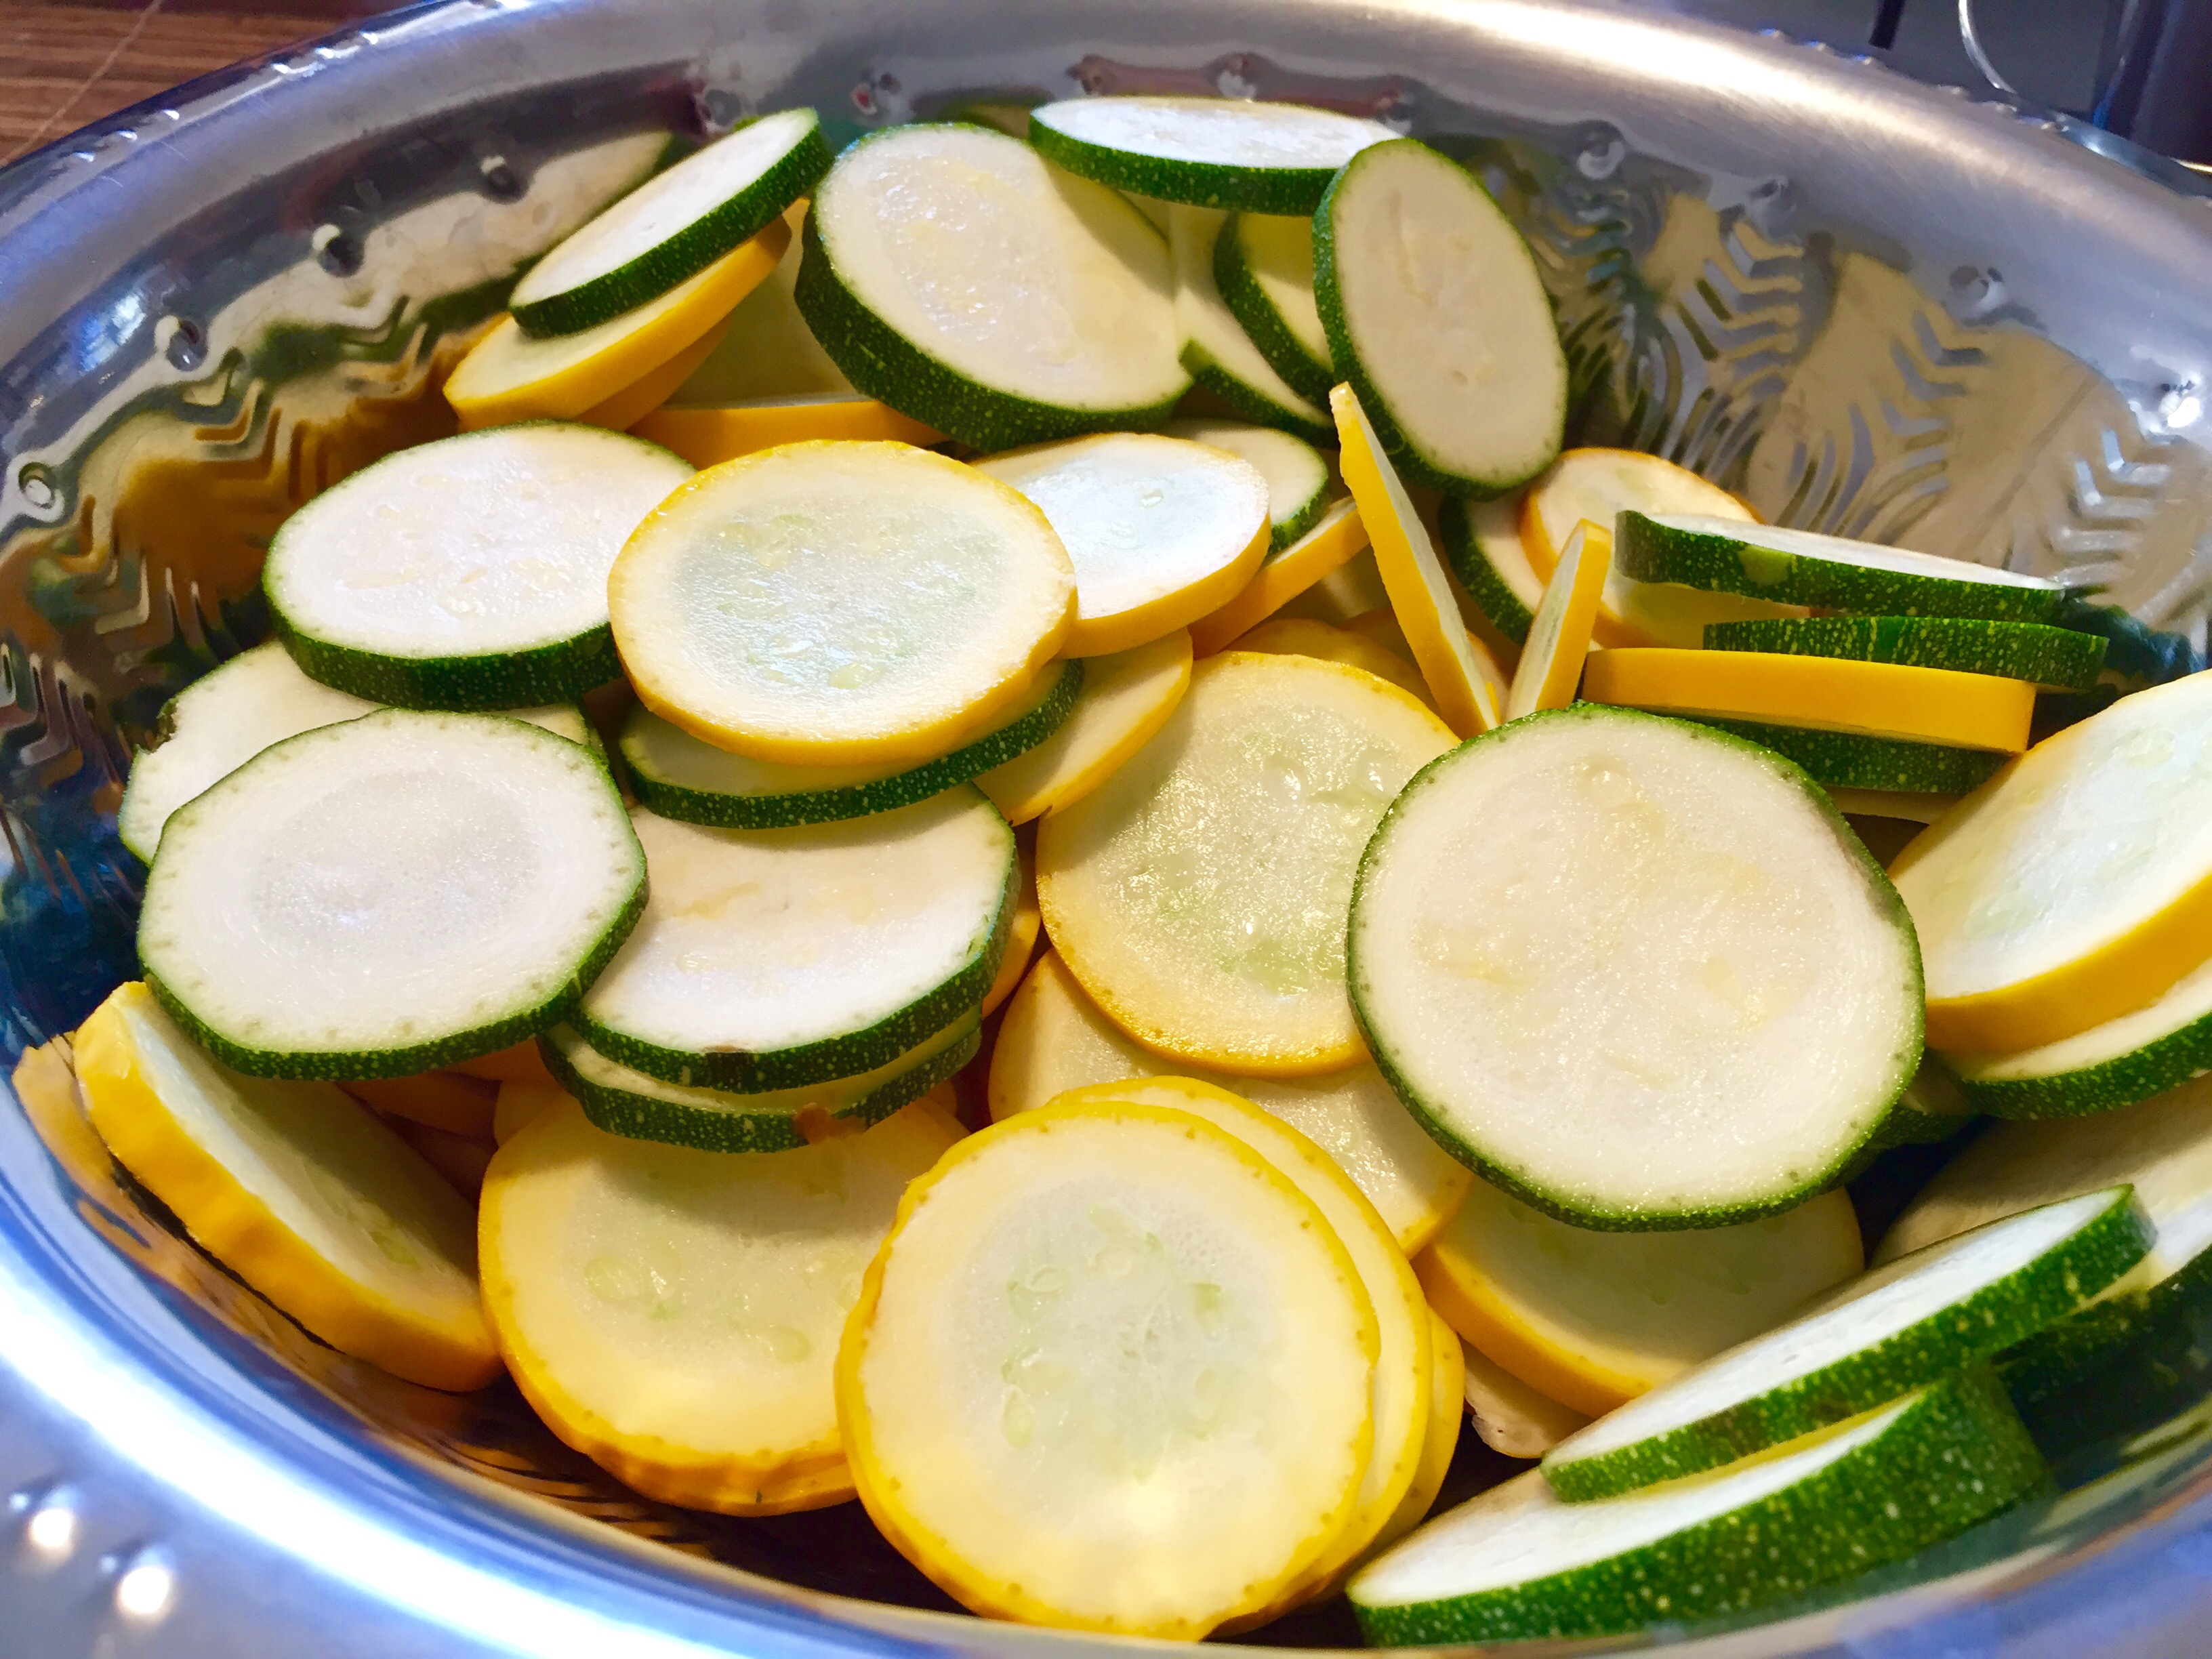 Yellow and green zucchini slices